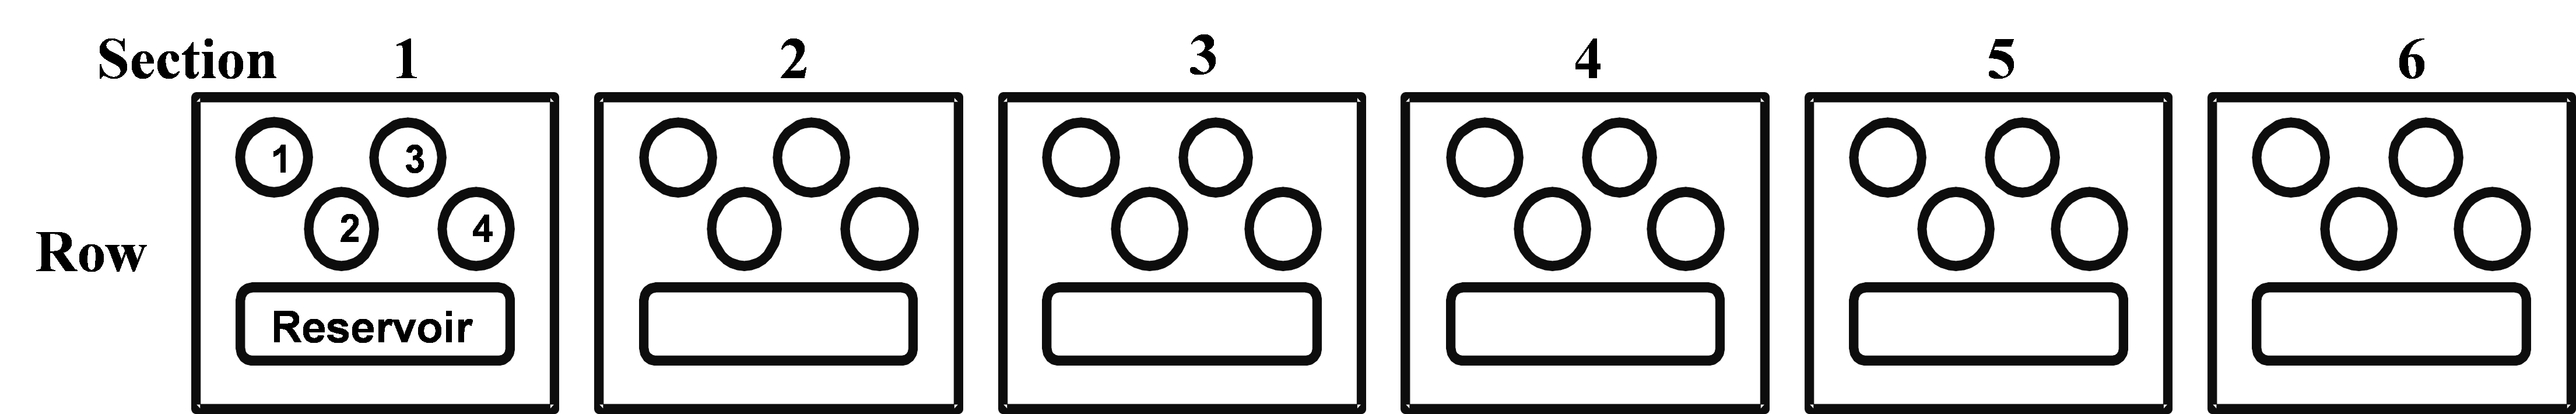 Schematic diagram of one row in a sitting drop plate